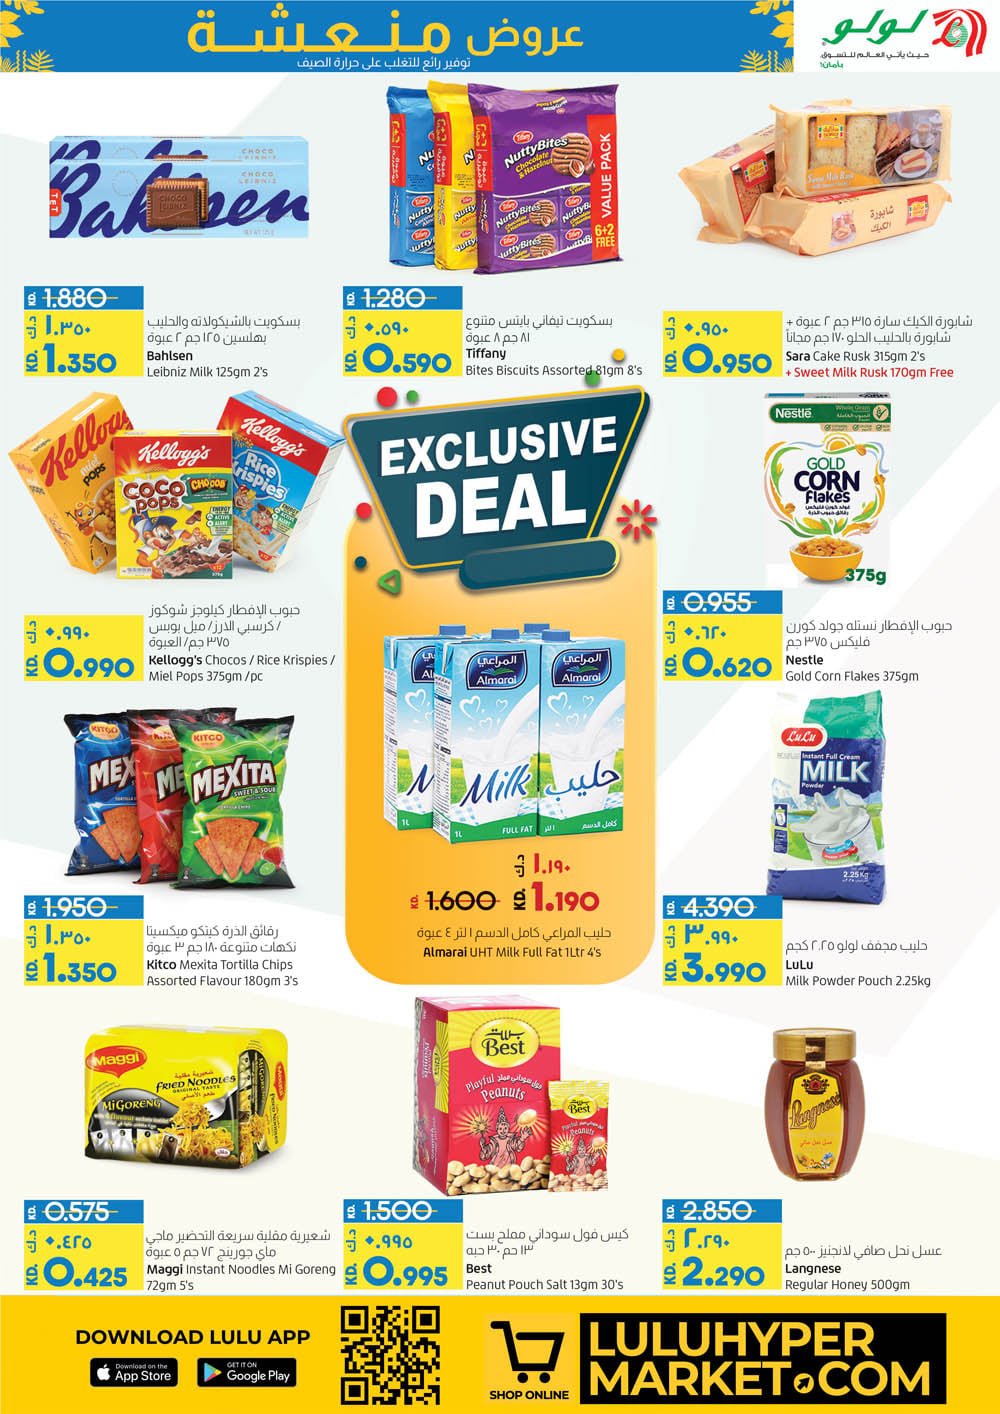 Lulu Hypermarket Chilled Offers, iiQ8 weekly promotions 5